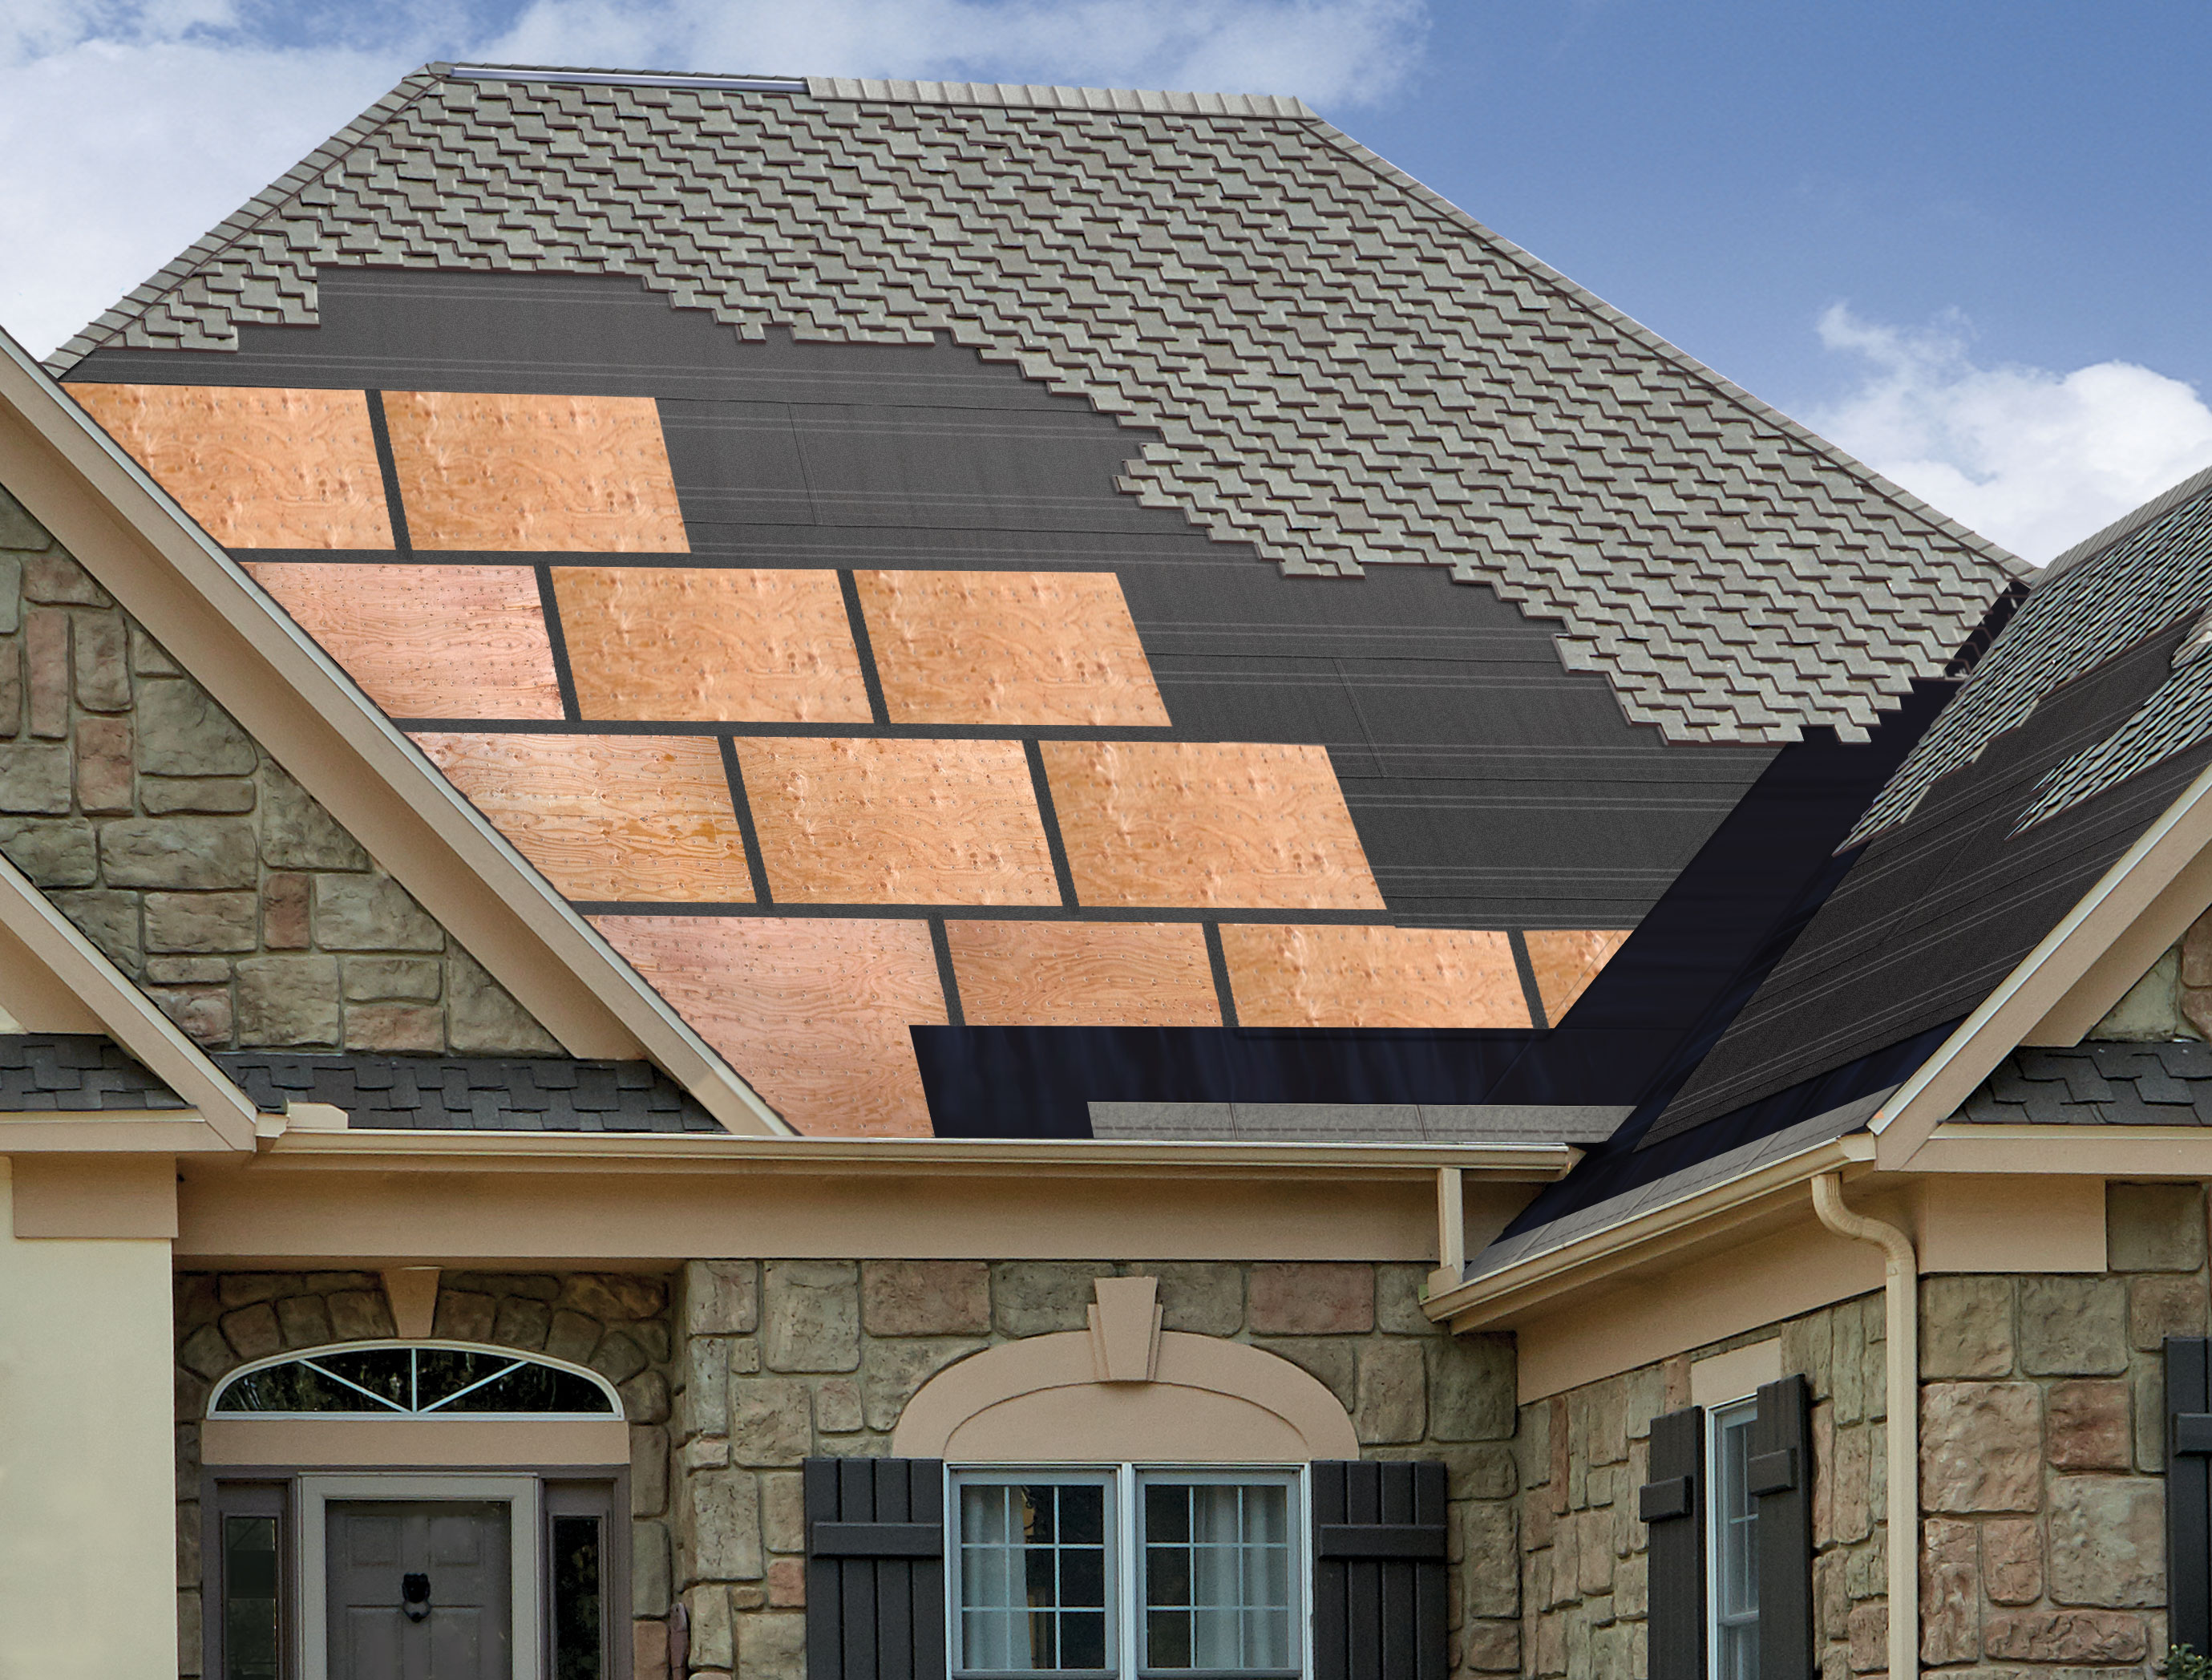 Tamko Introduces Seam Tape For Added Protection on Roof Sheathing Residential Products Online